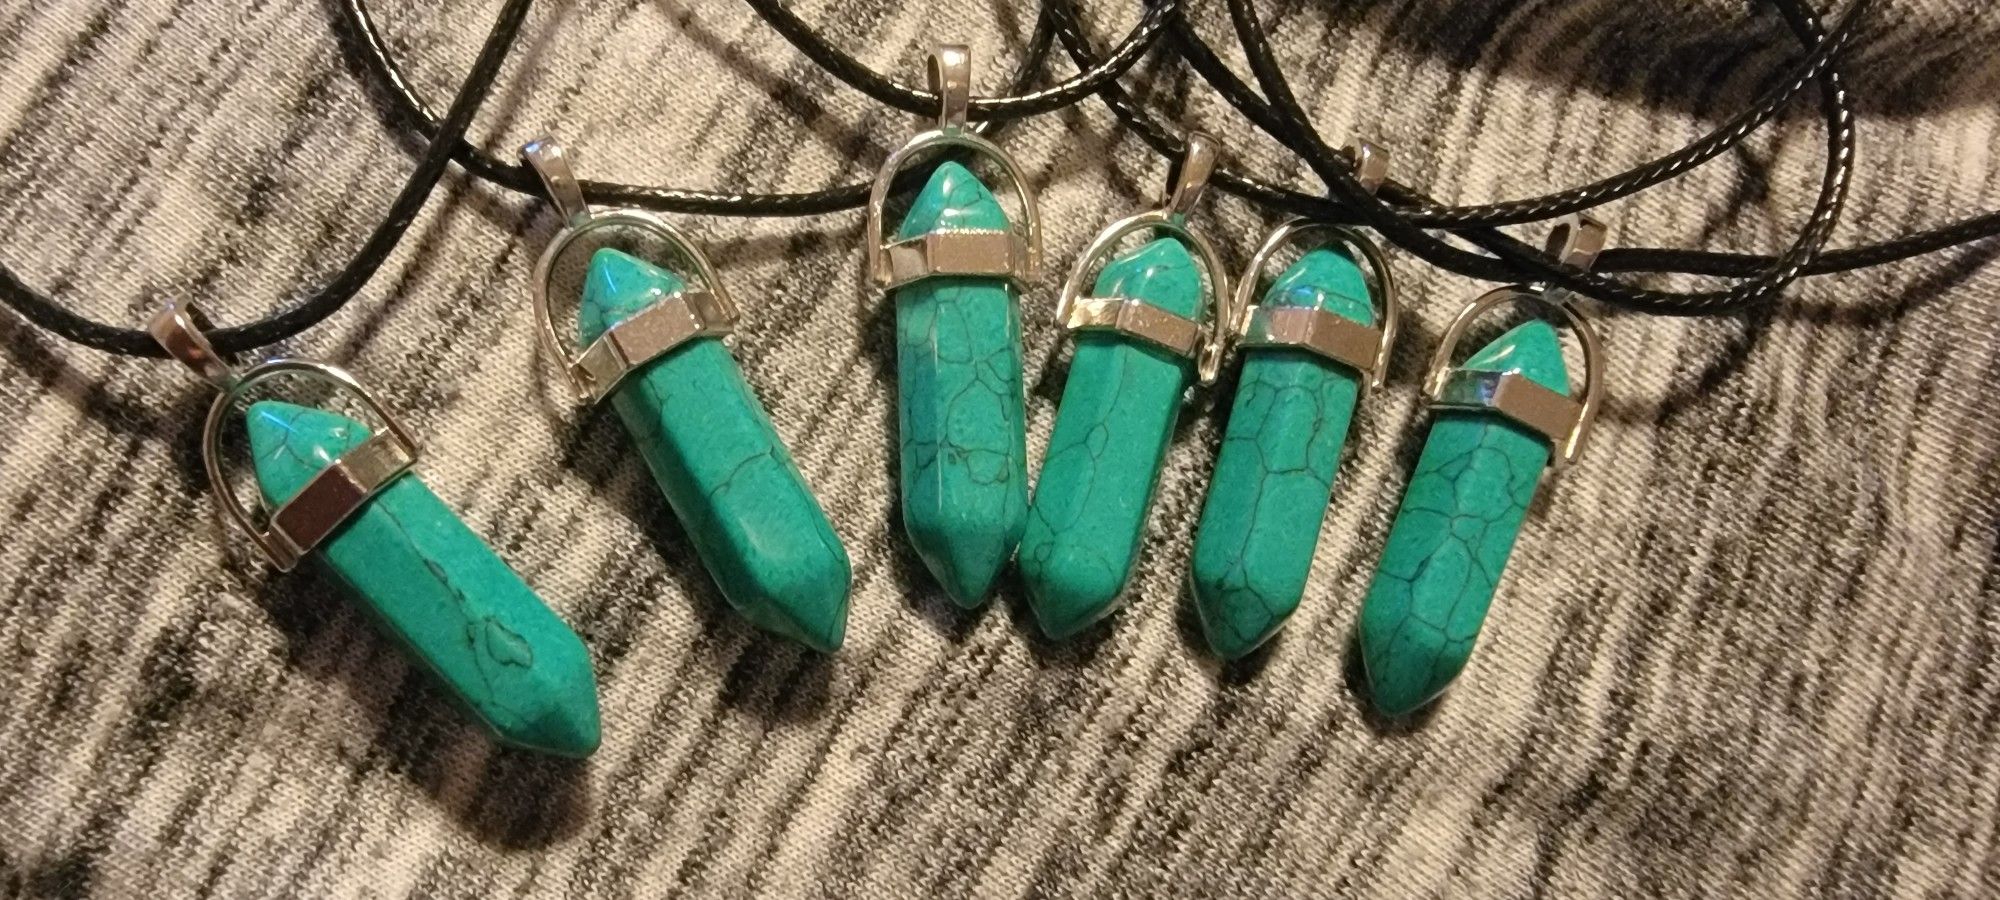 Turquoise Necklace  